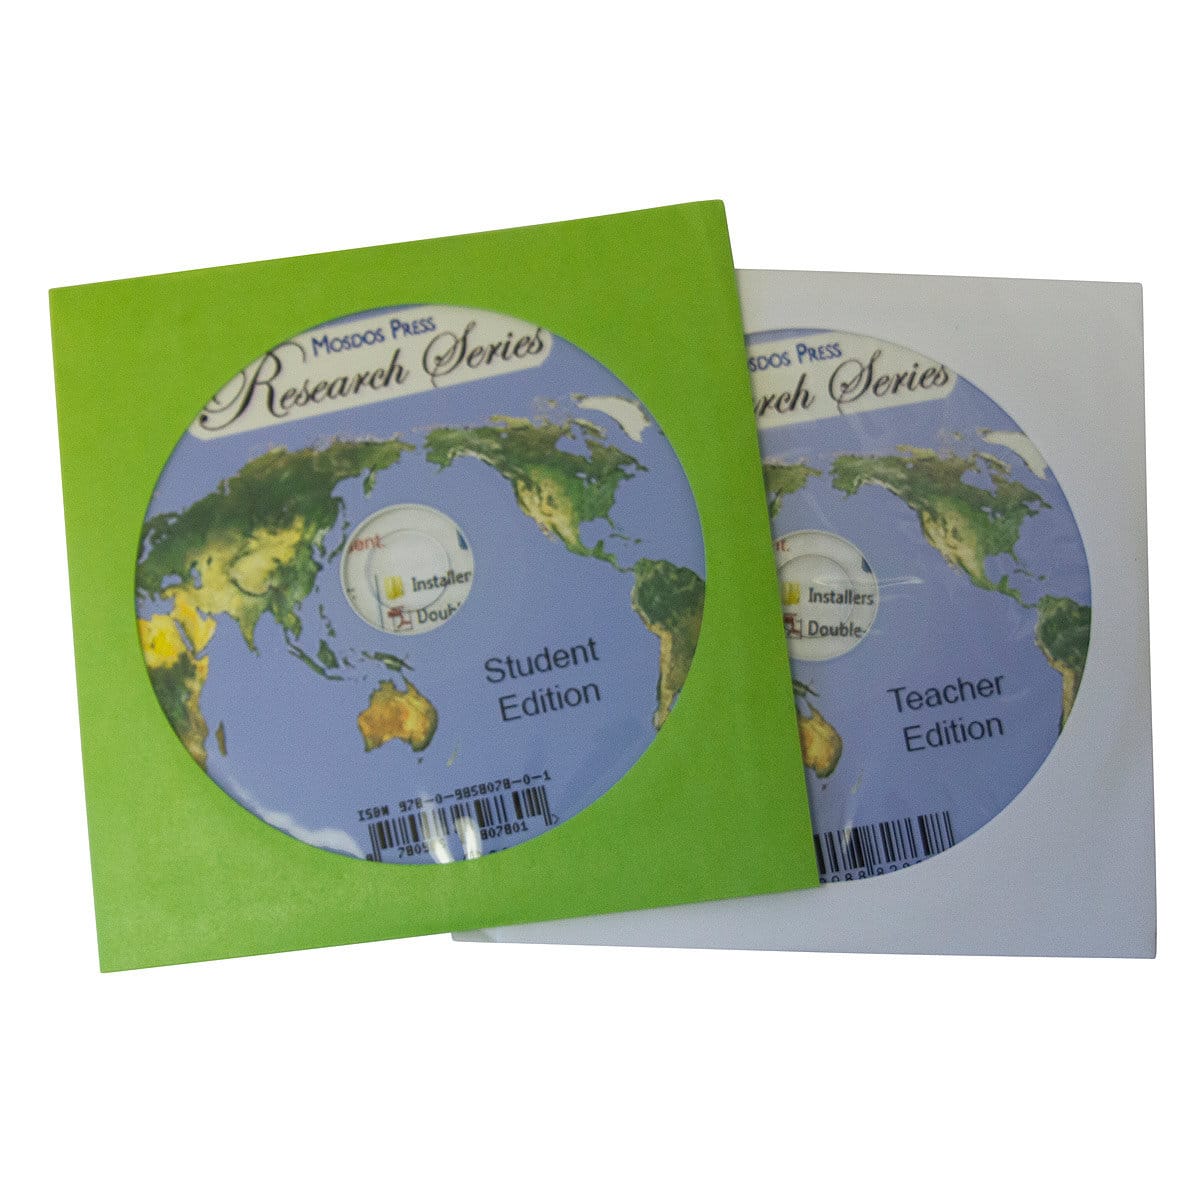 Research Series CD Set, Student Edition and Teachers Edition